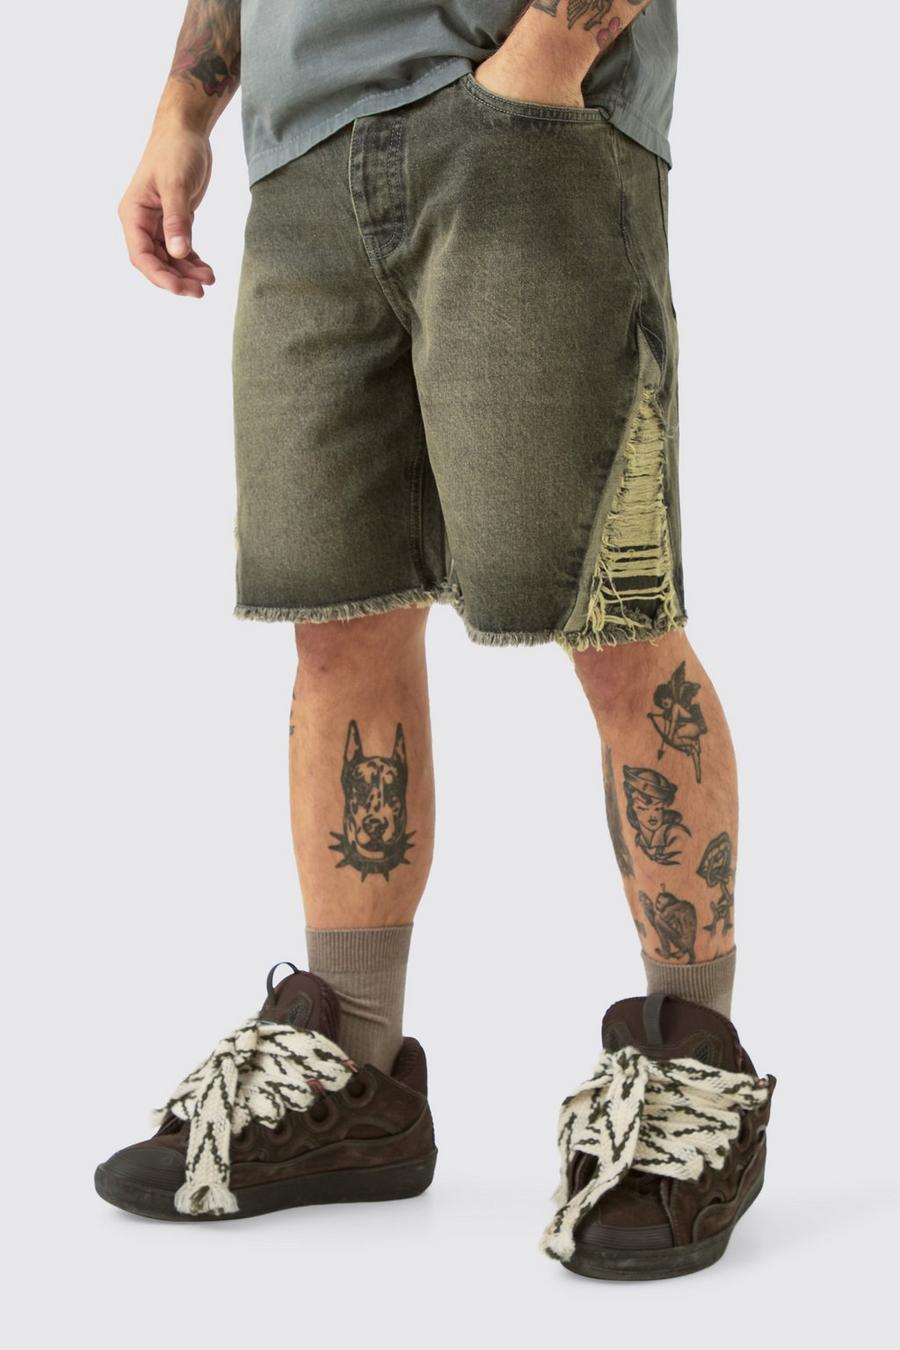 Relaxed Rigid Extreme Side Ripped Denim Short In Antique Grey, Antique wash